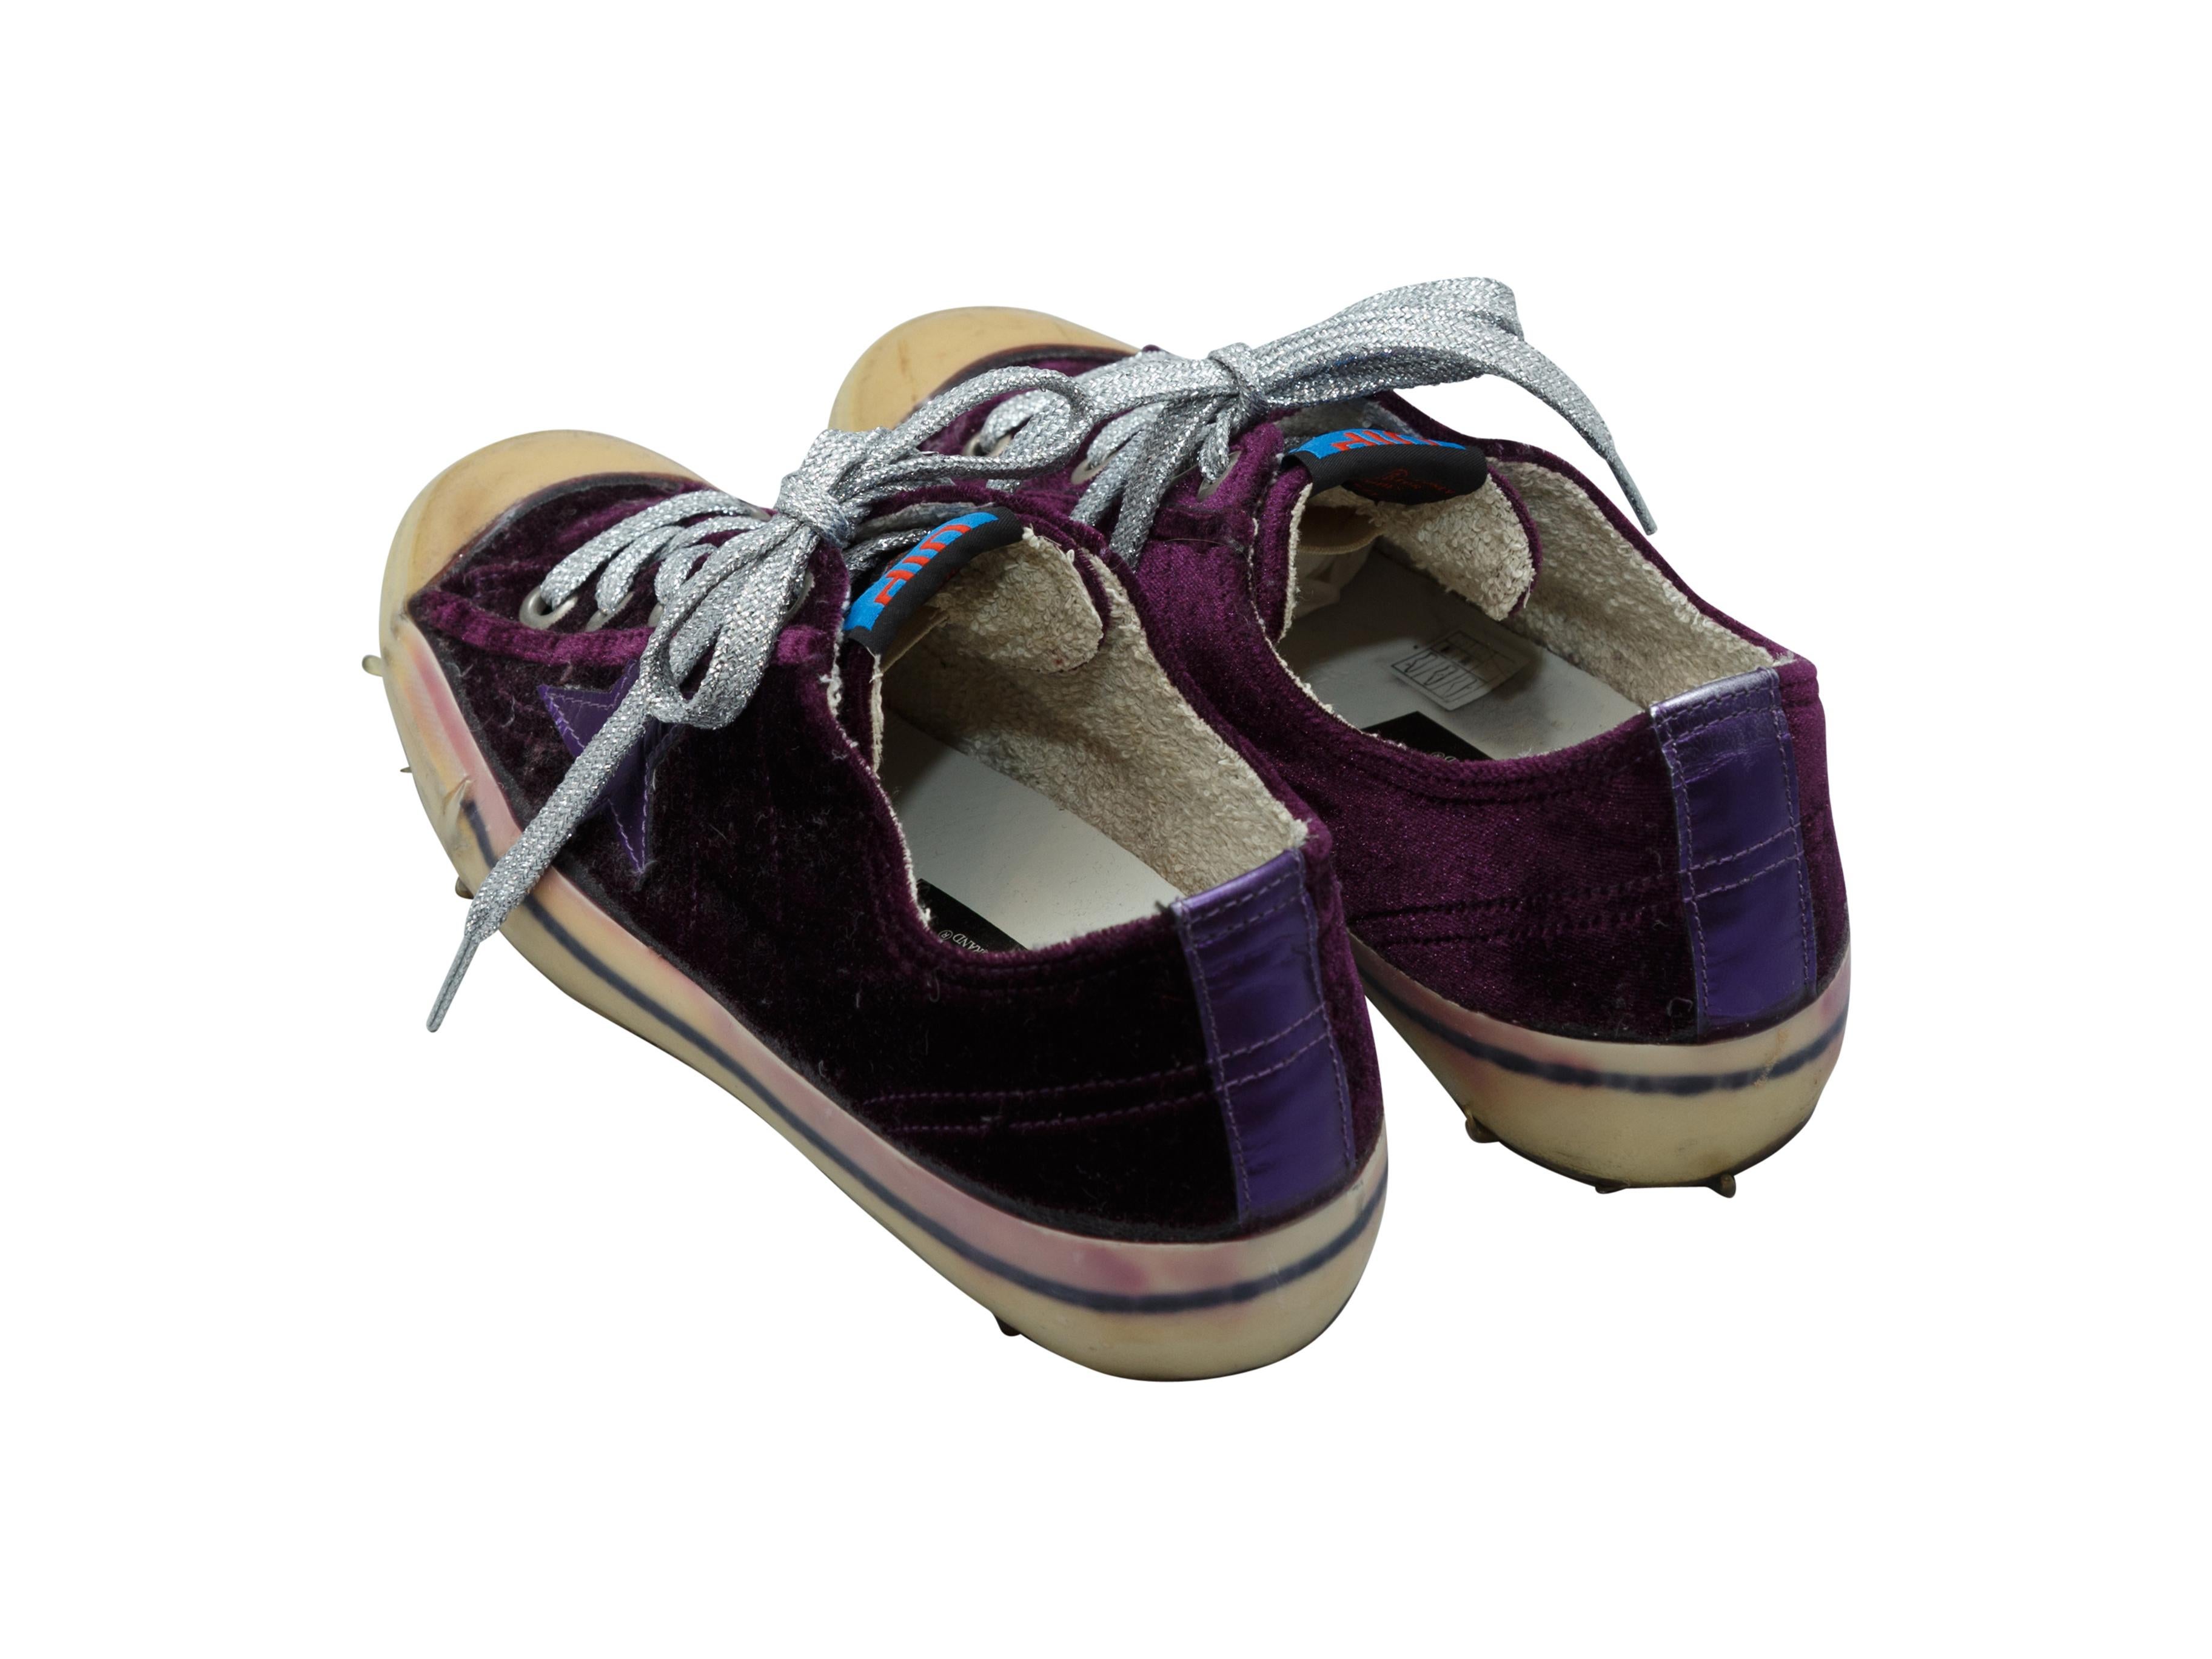 Product details: Dark purple velvet low-top sneakers by Golden Goose. Rubber cap-toes. Star stitching at sides. Lace-up closures at tops. 1.13